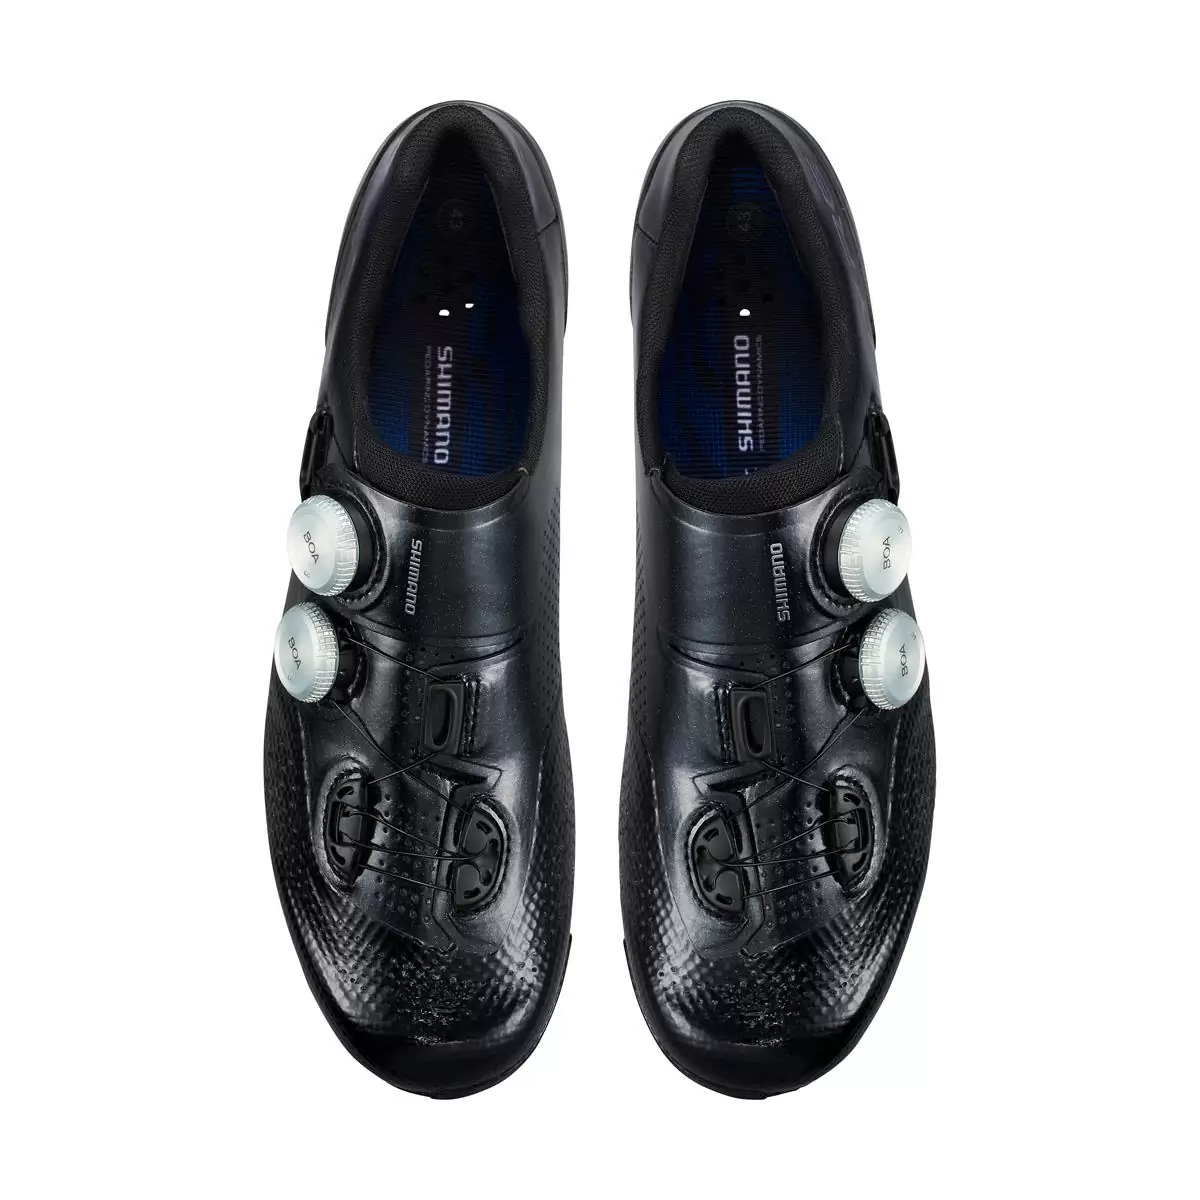 Road Shoes RC9 S-PHYRE SH-RC902S Black Limited edition size 39 SHIMAN